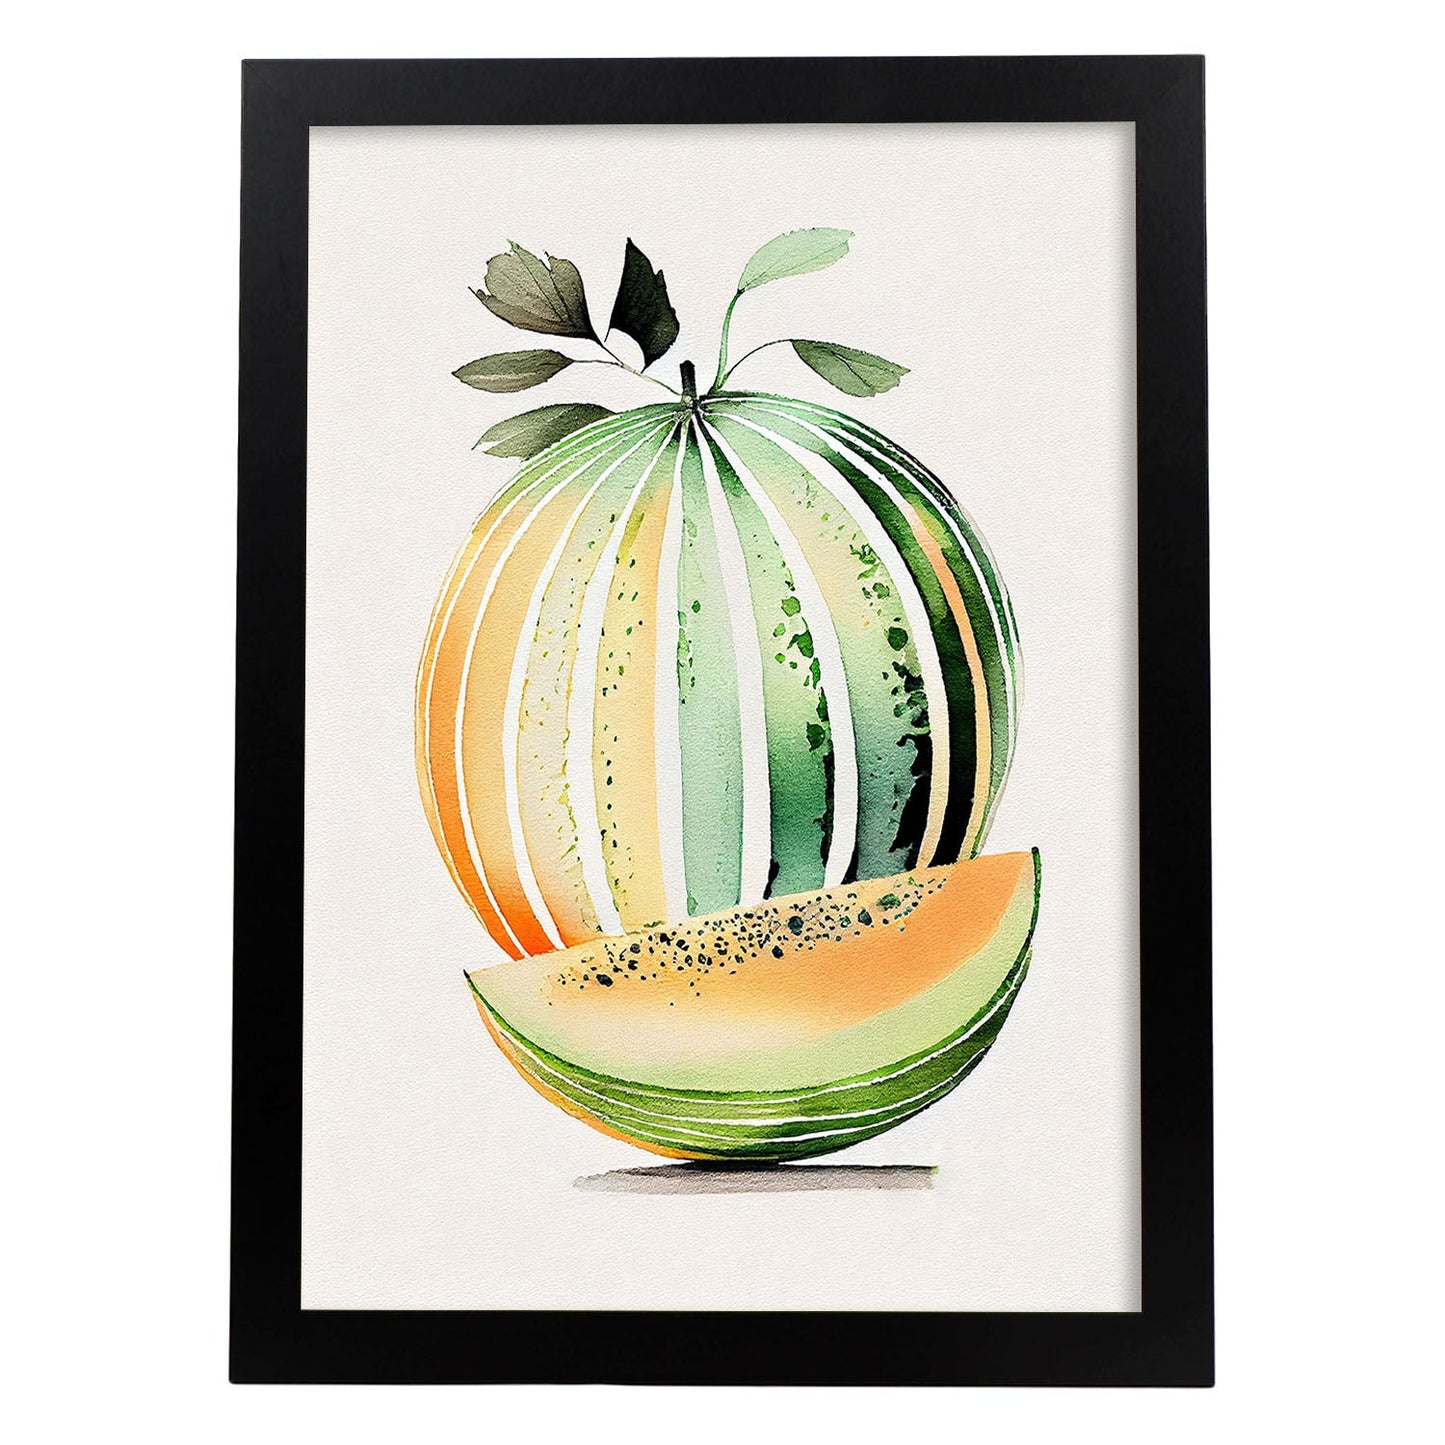 Nacnic minimalist Melon_2. Aesthetic Wall Art Prints for Bedroom or Living Room Design.